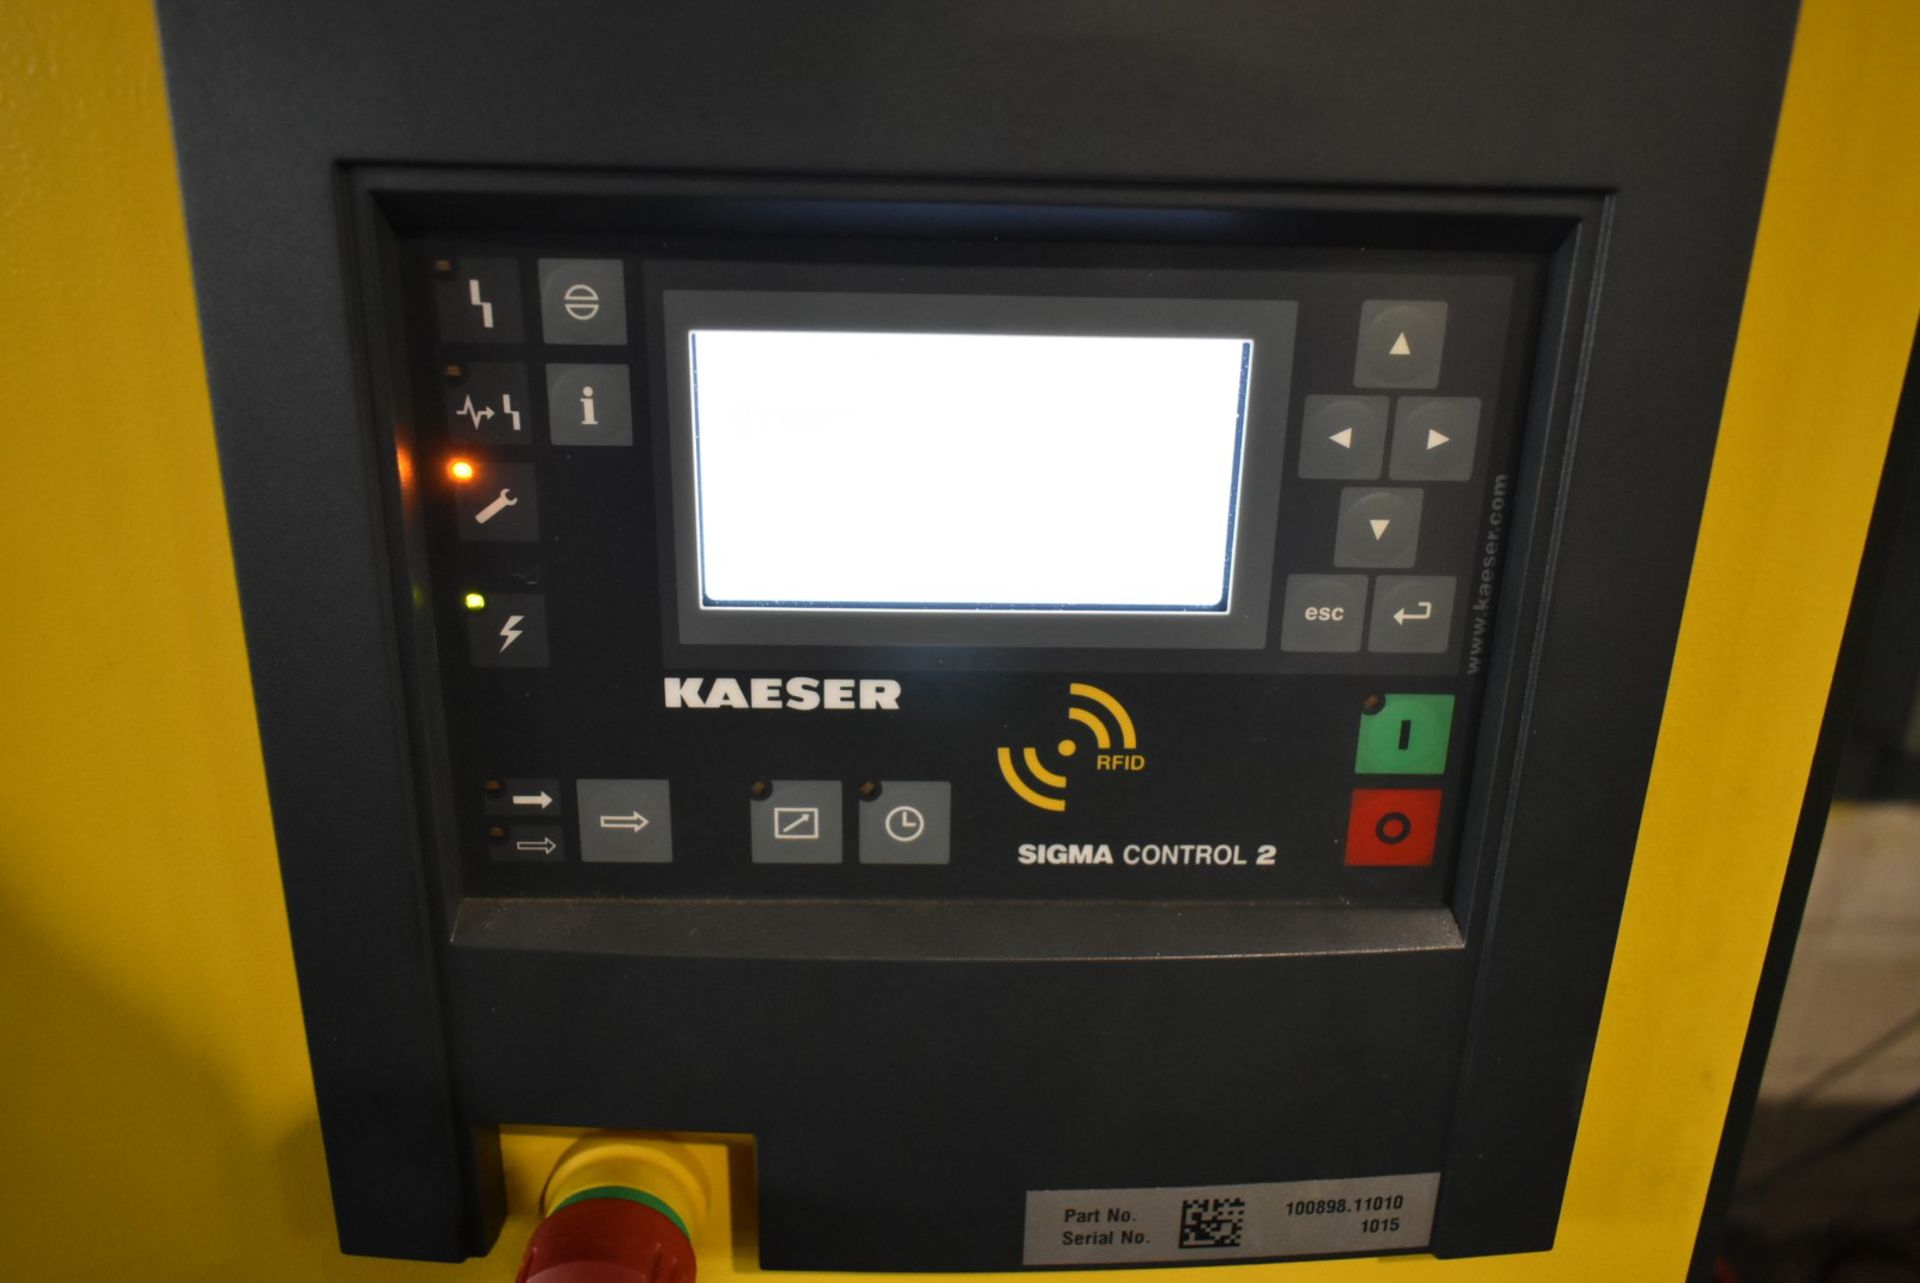 KAESER SX5 ROTARY SCREW COMPRESSOR WITH 2664HRS (RECORDED ON METER @ TIME OF LISTING) S/N: 1015 (CI) - Image 3 of 4